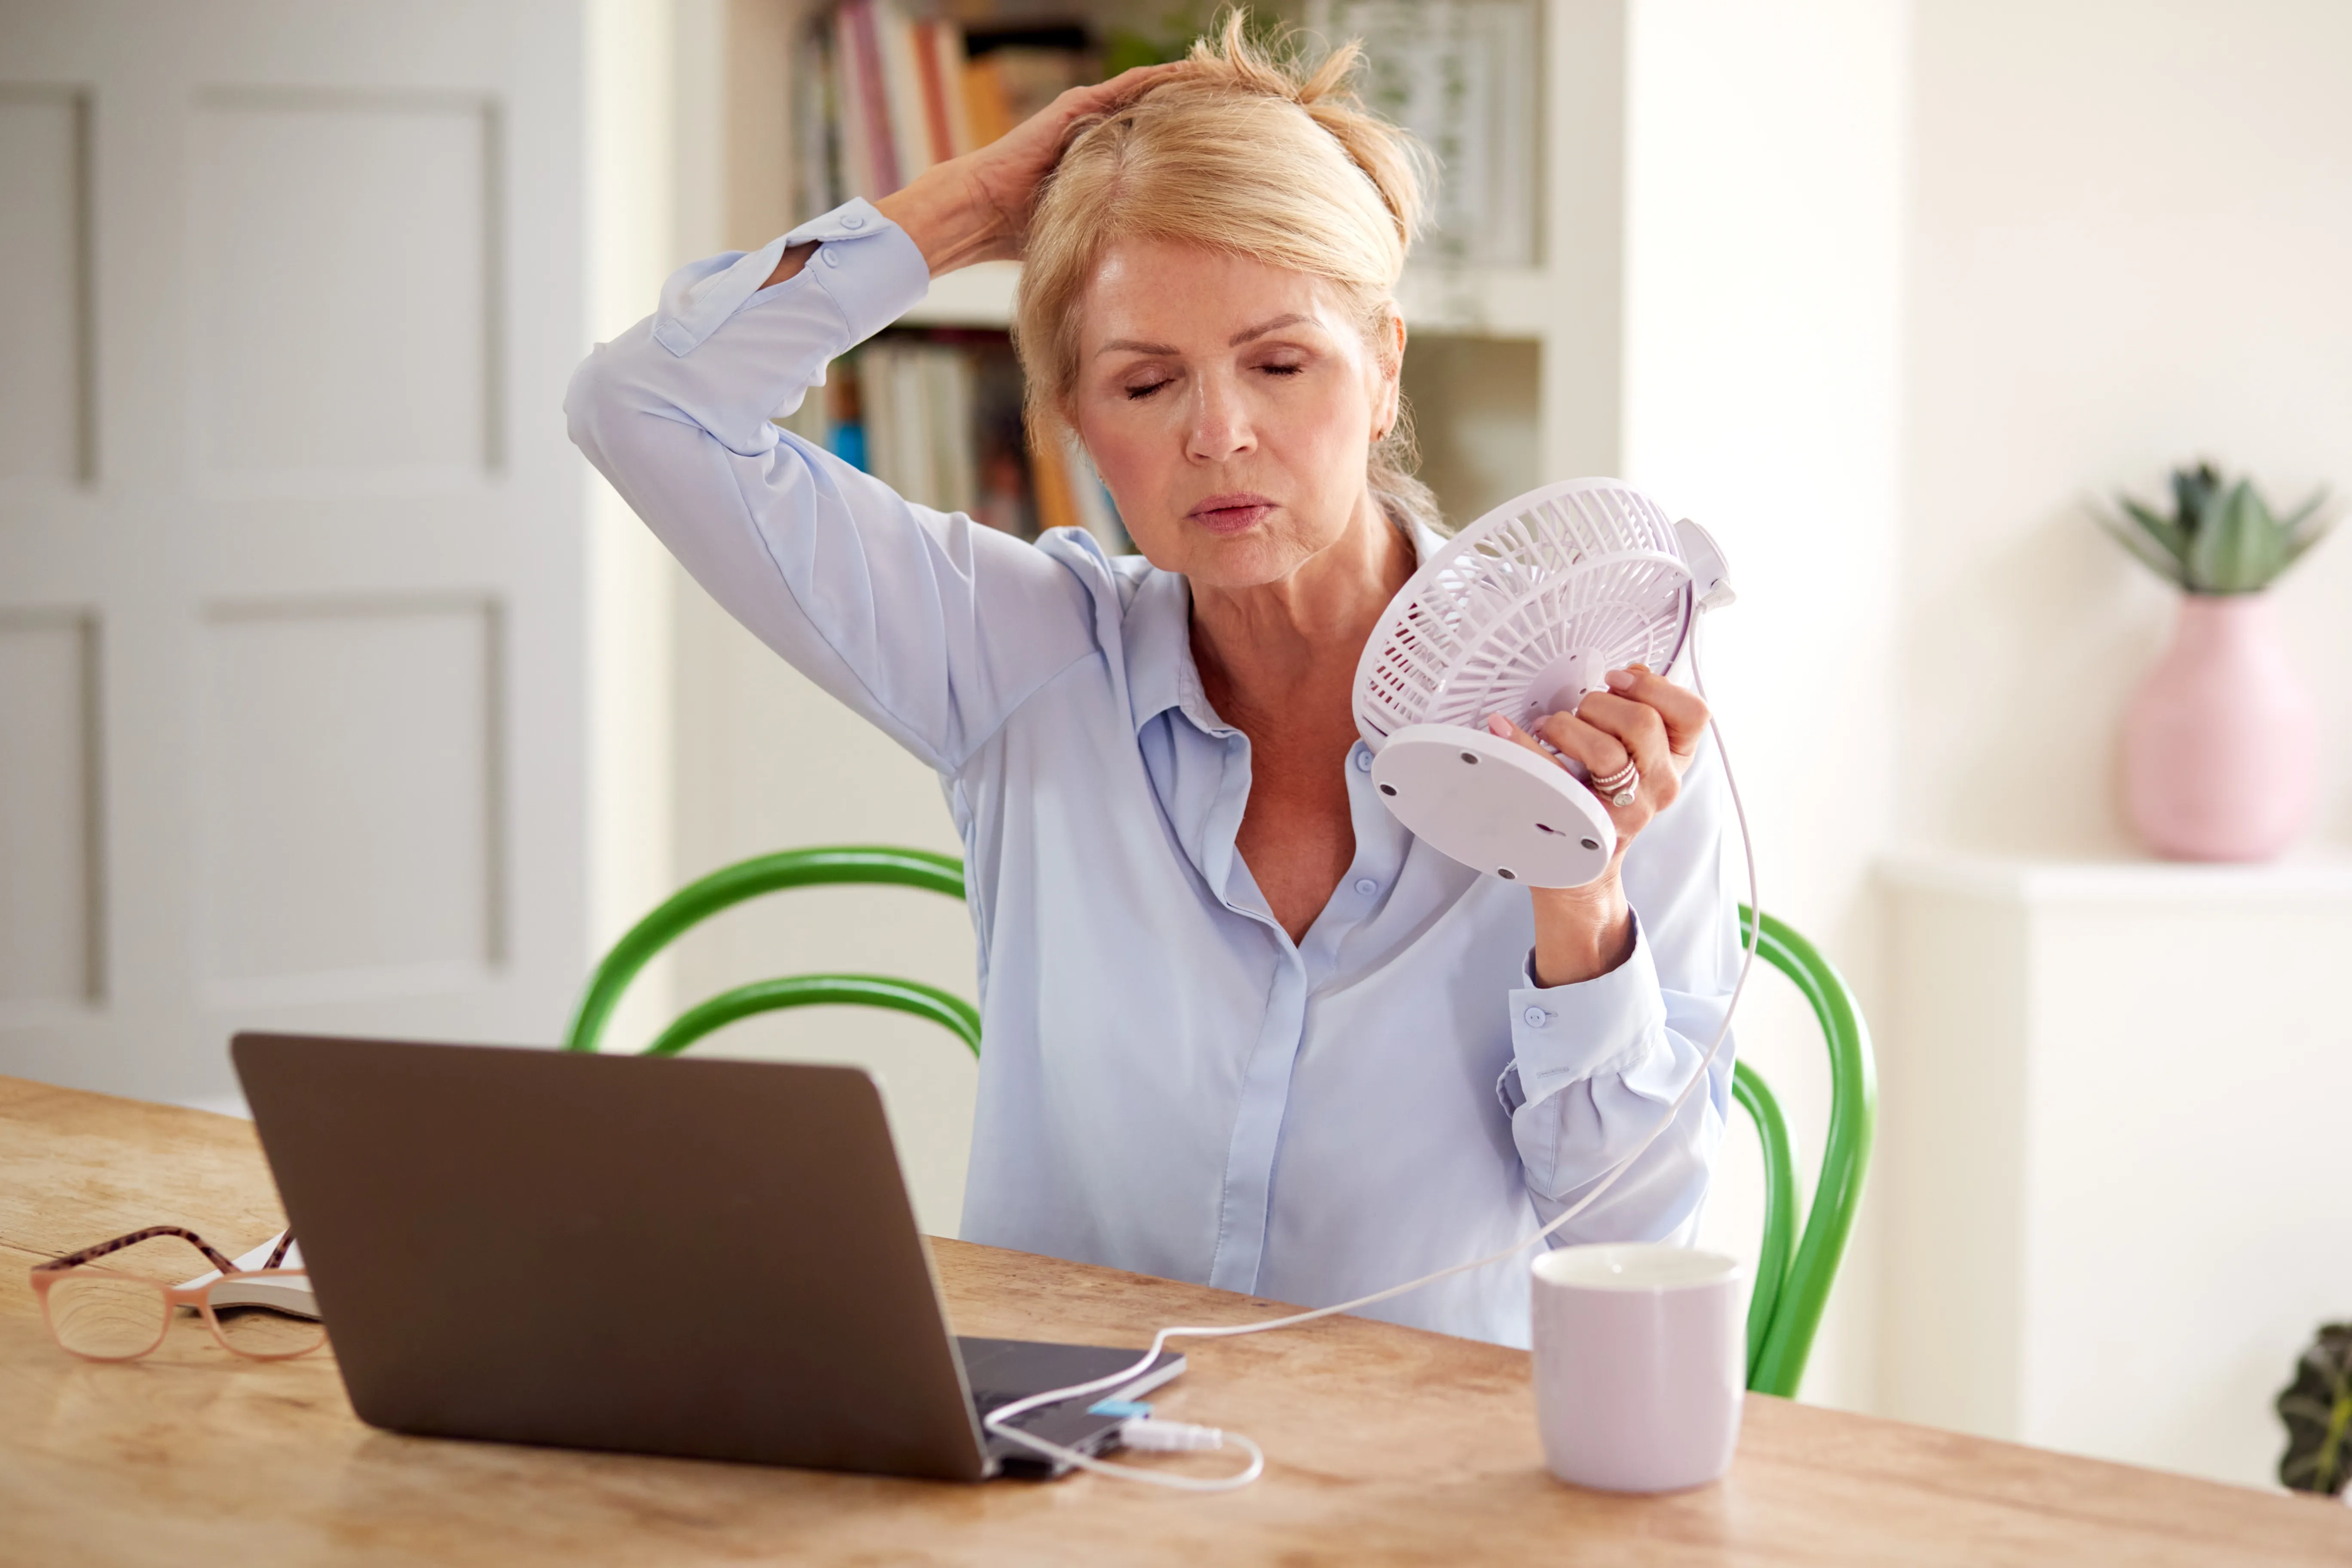 Recognizing 20 Early Signs of Menopause